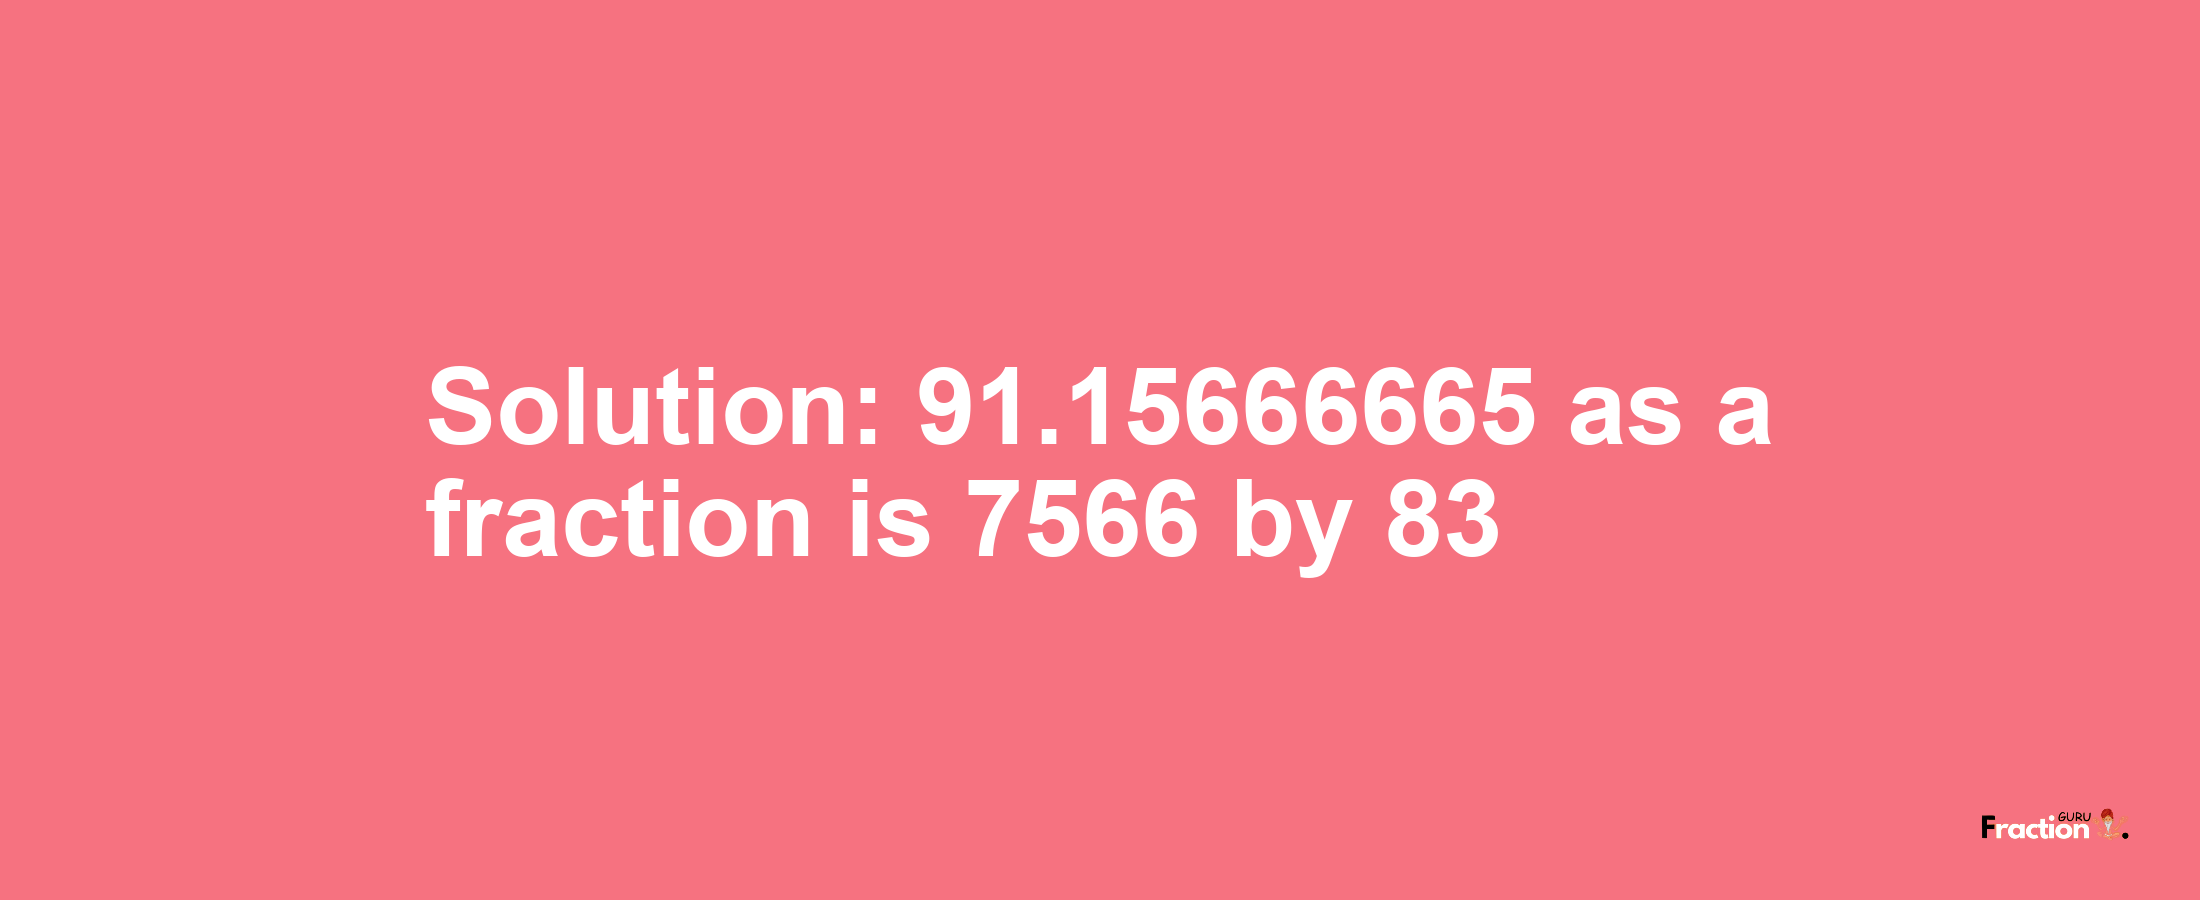 Solution:91.15666665 as a fraction is 7566/83